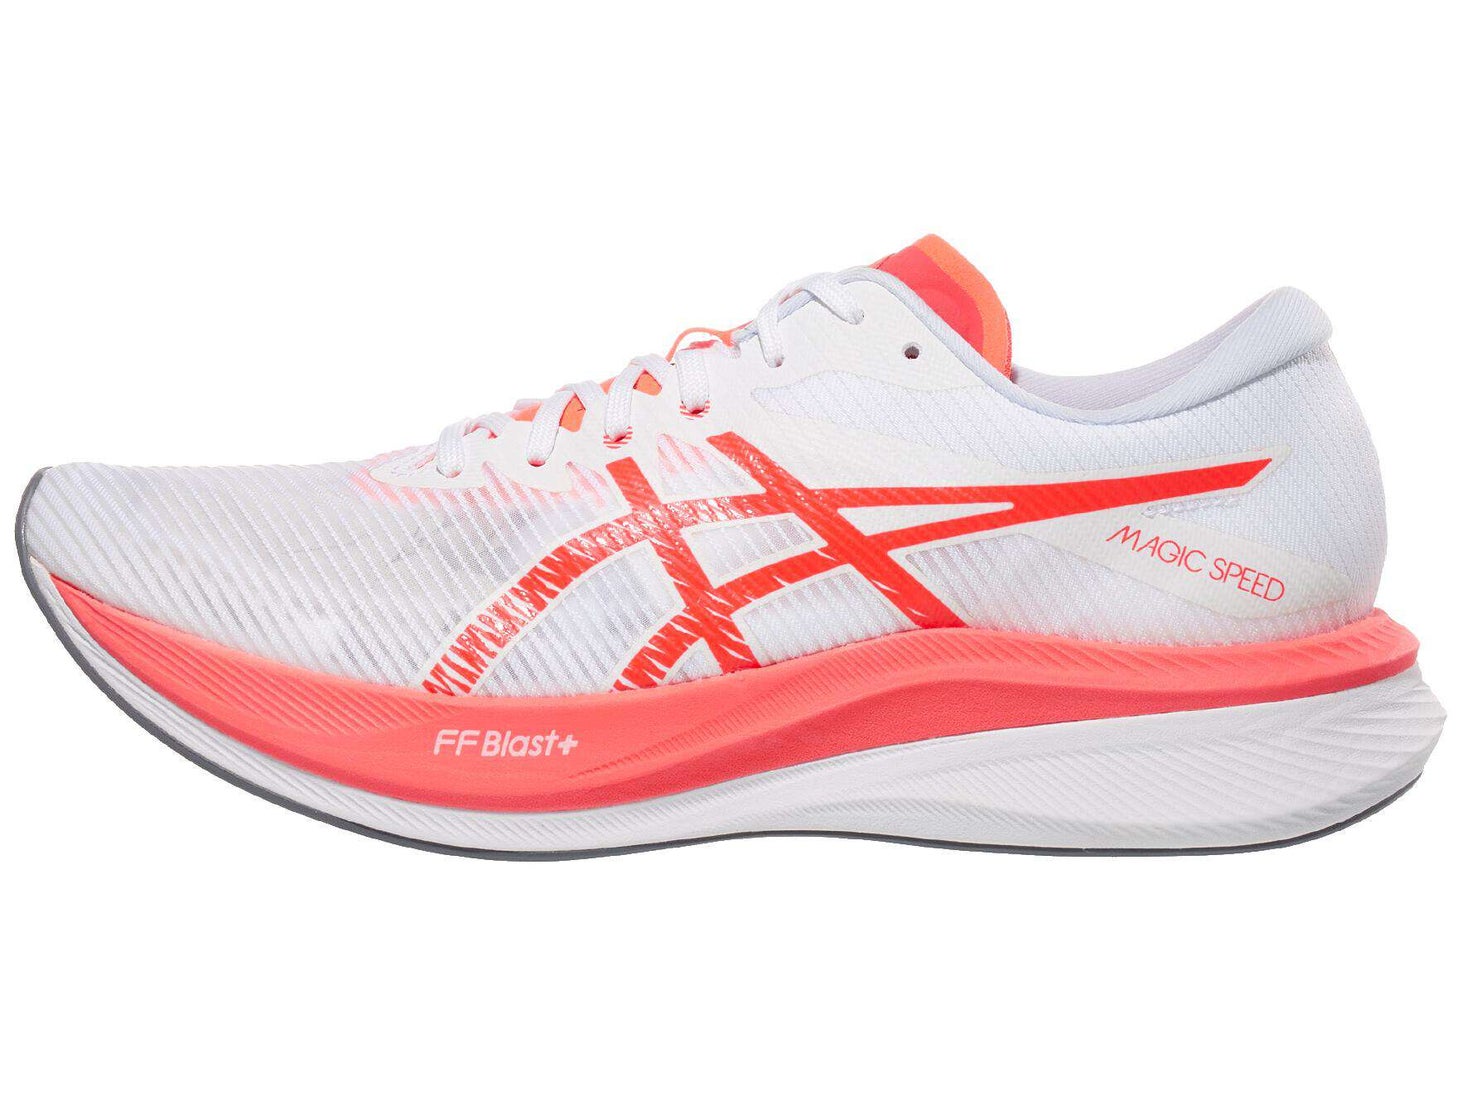 Discover The Best ASICS Running Shoes | Running Warehouse Gear Guide